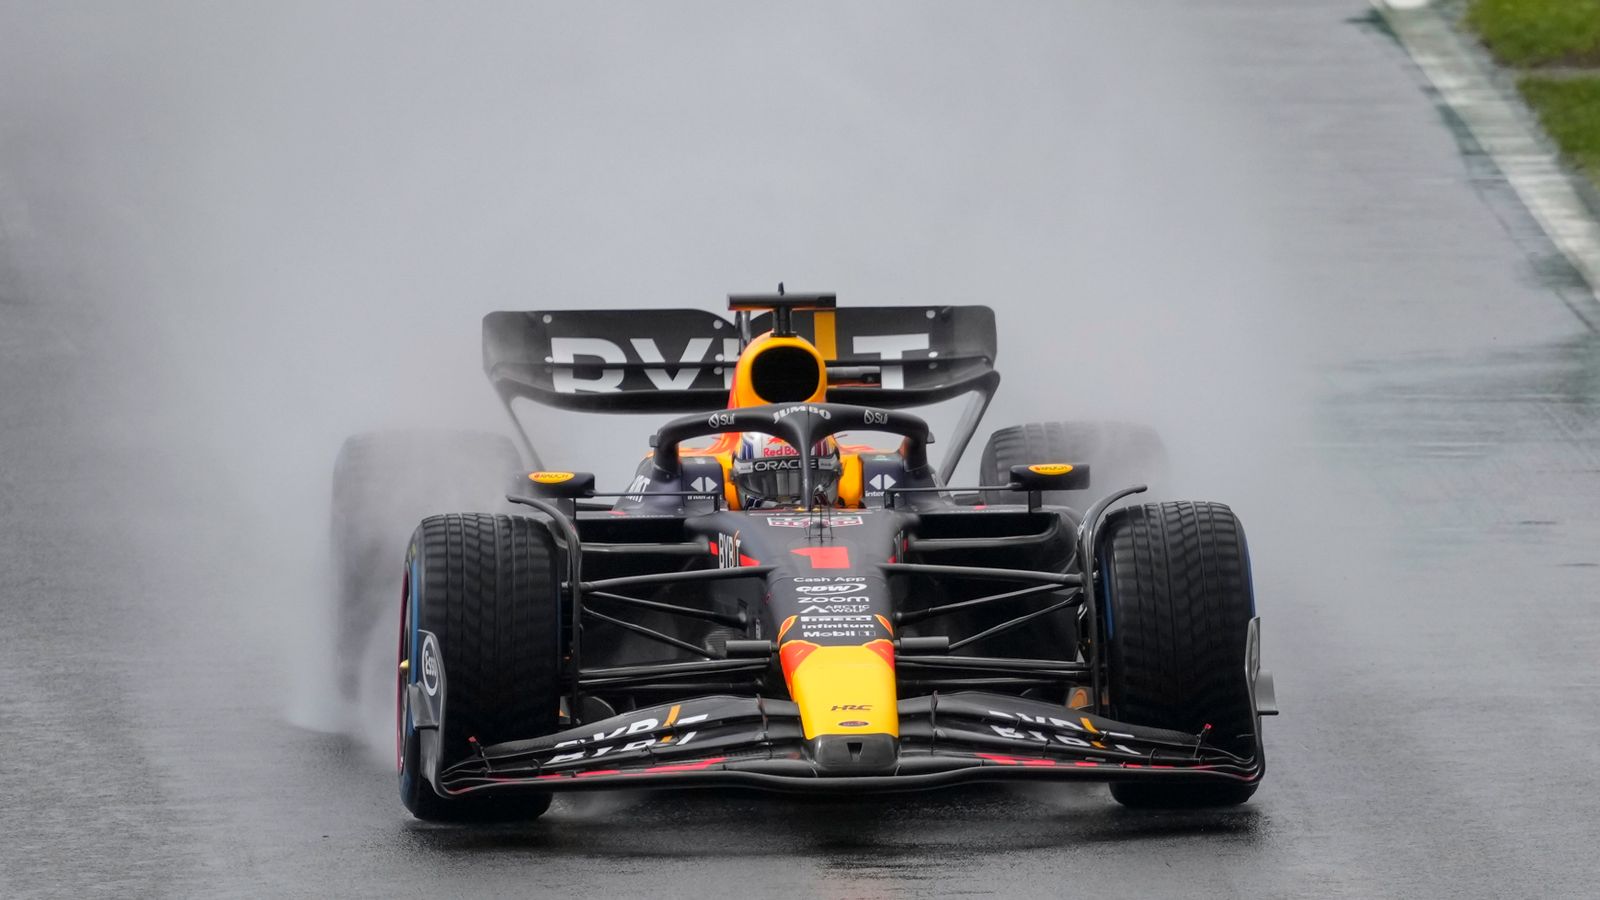 Dutch GP: Max Verstappen tops chaotic moist remaining follow from George Russell after three pink flags